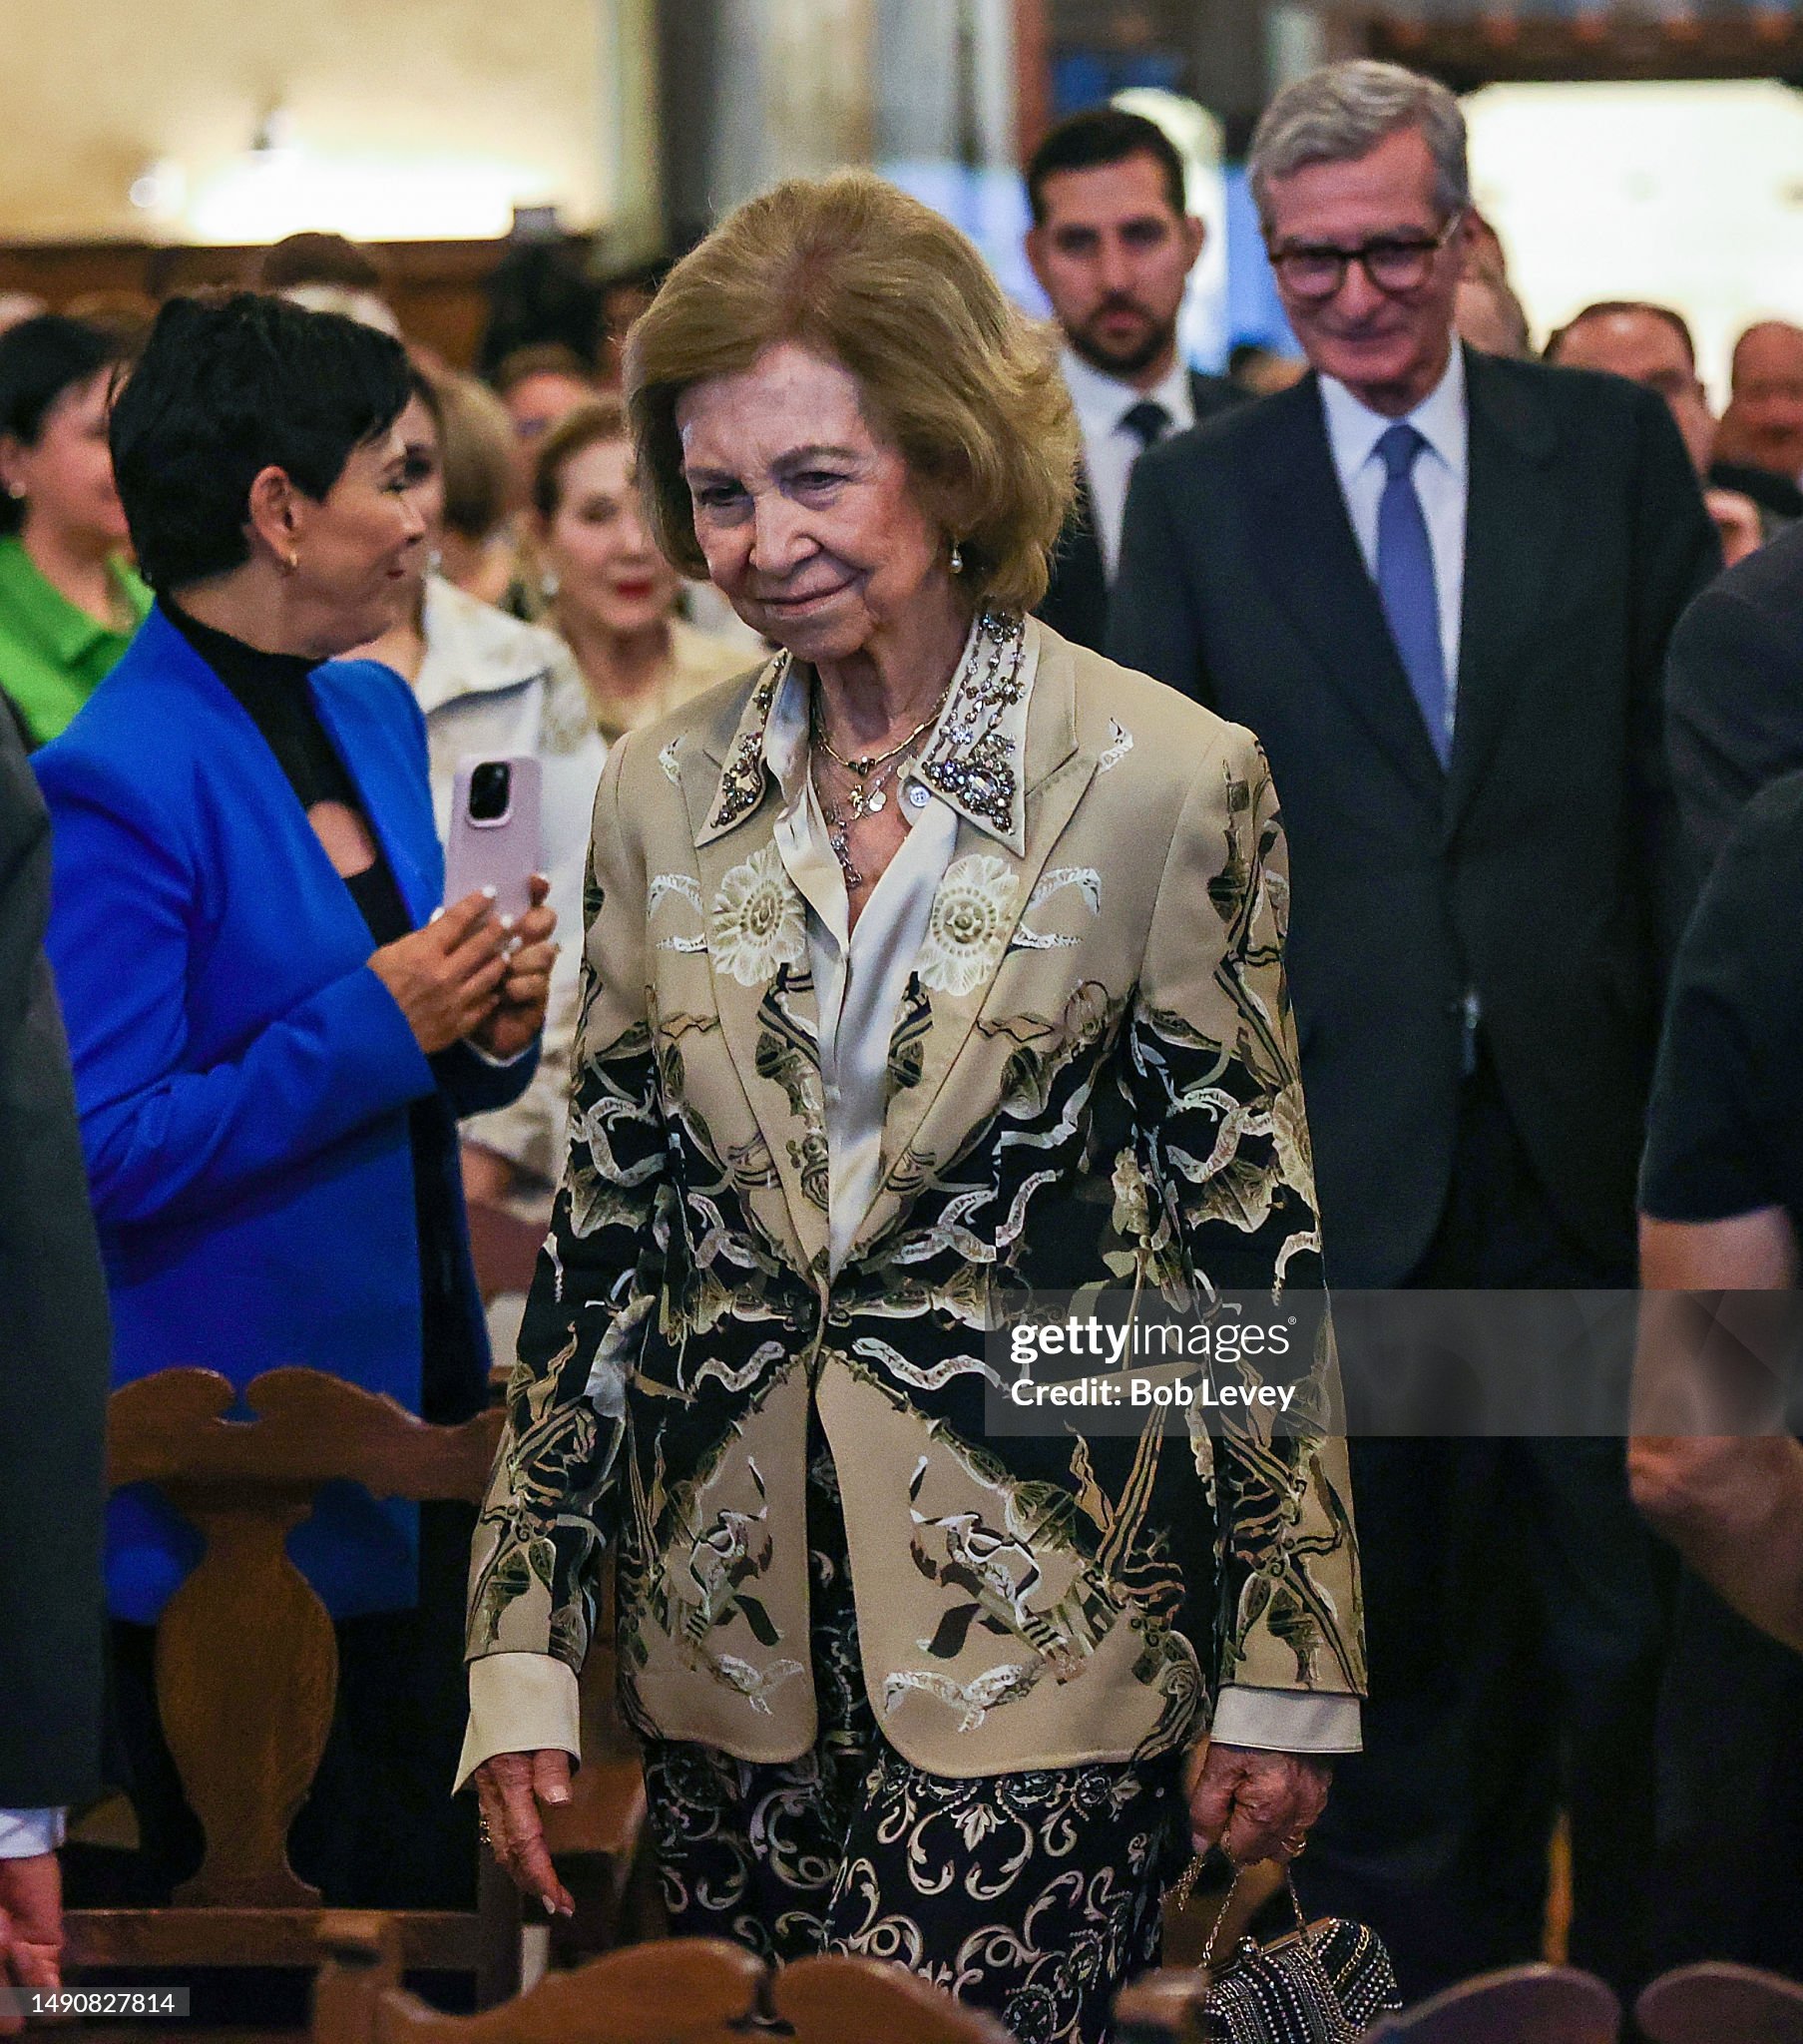 queen-sofia-of-spain-at-the-julia-ideson-building-on-may-16-2023-in-houston-texas.jpg